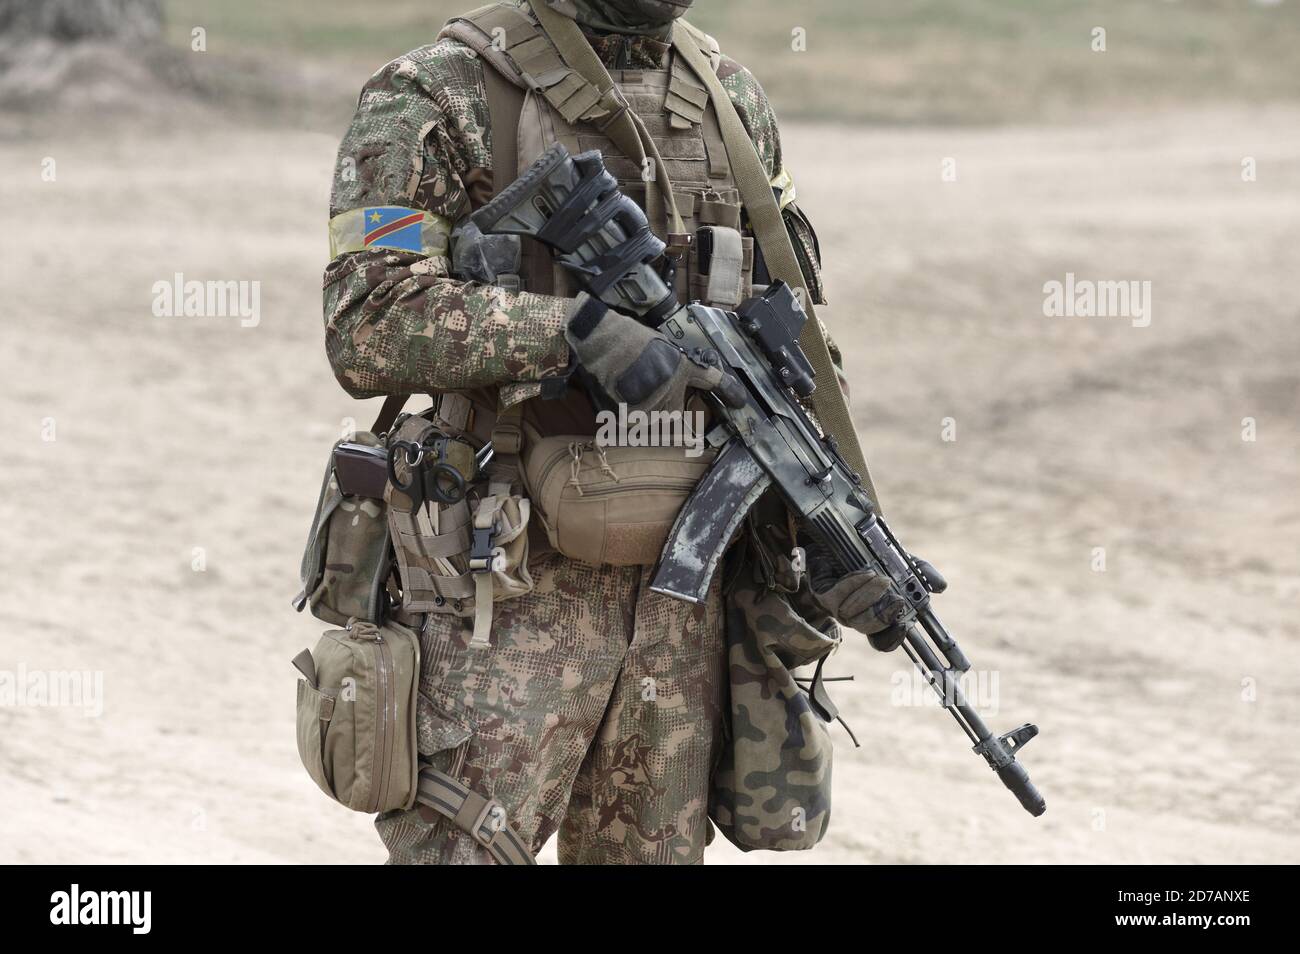 Soldier with machine gun and flag of Democratic Republic of the Congo on military uniform. Collage. Stock Photo